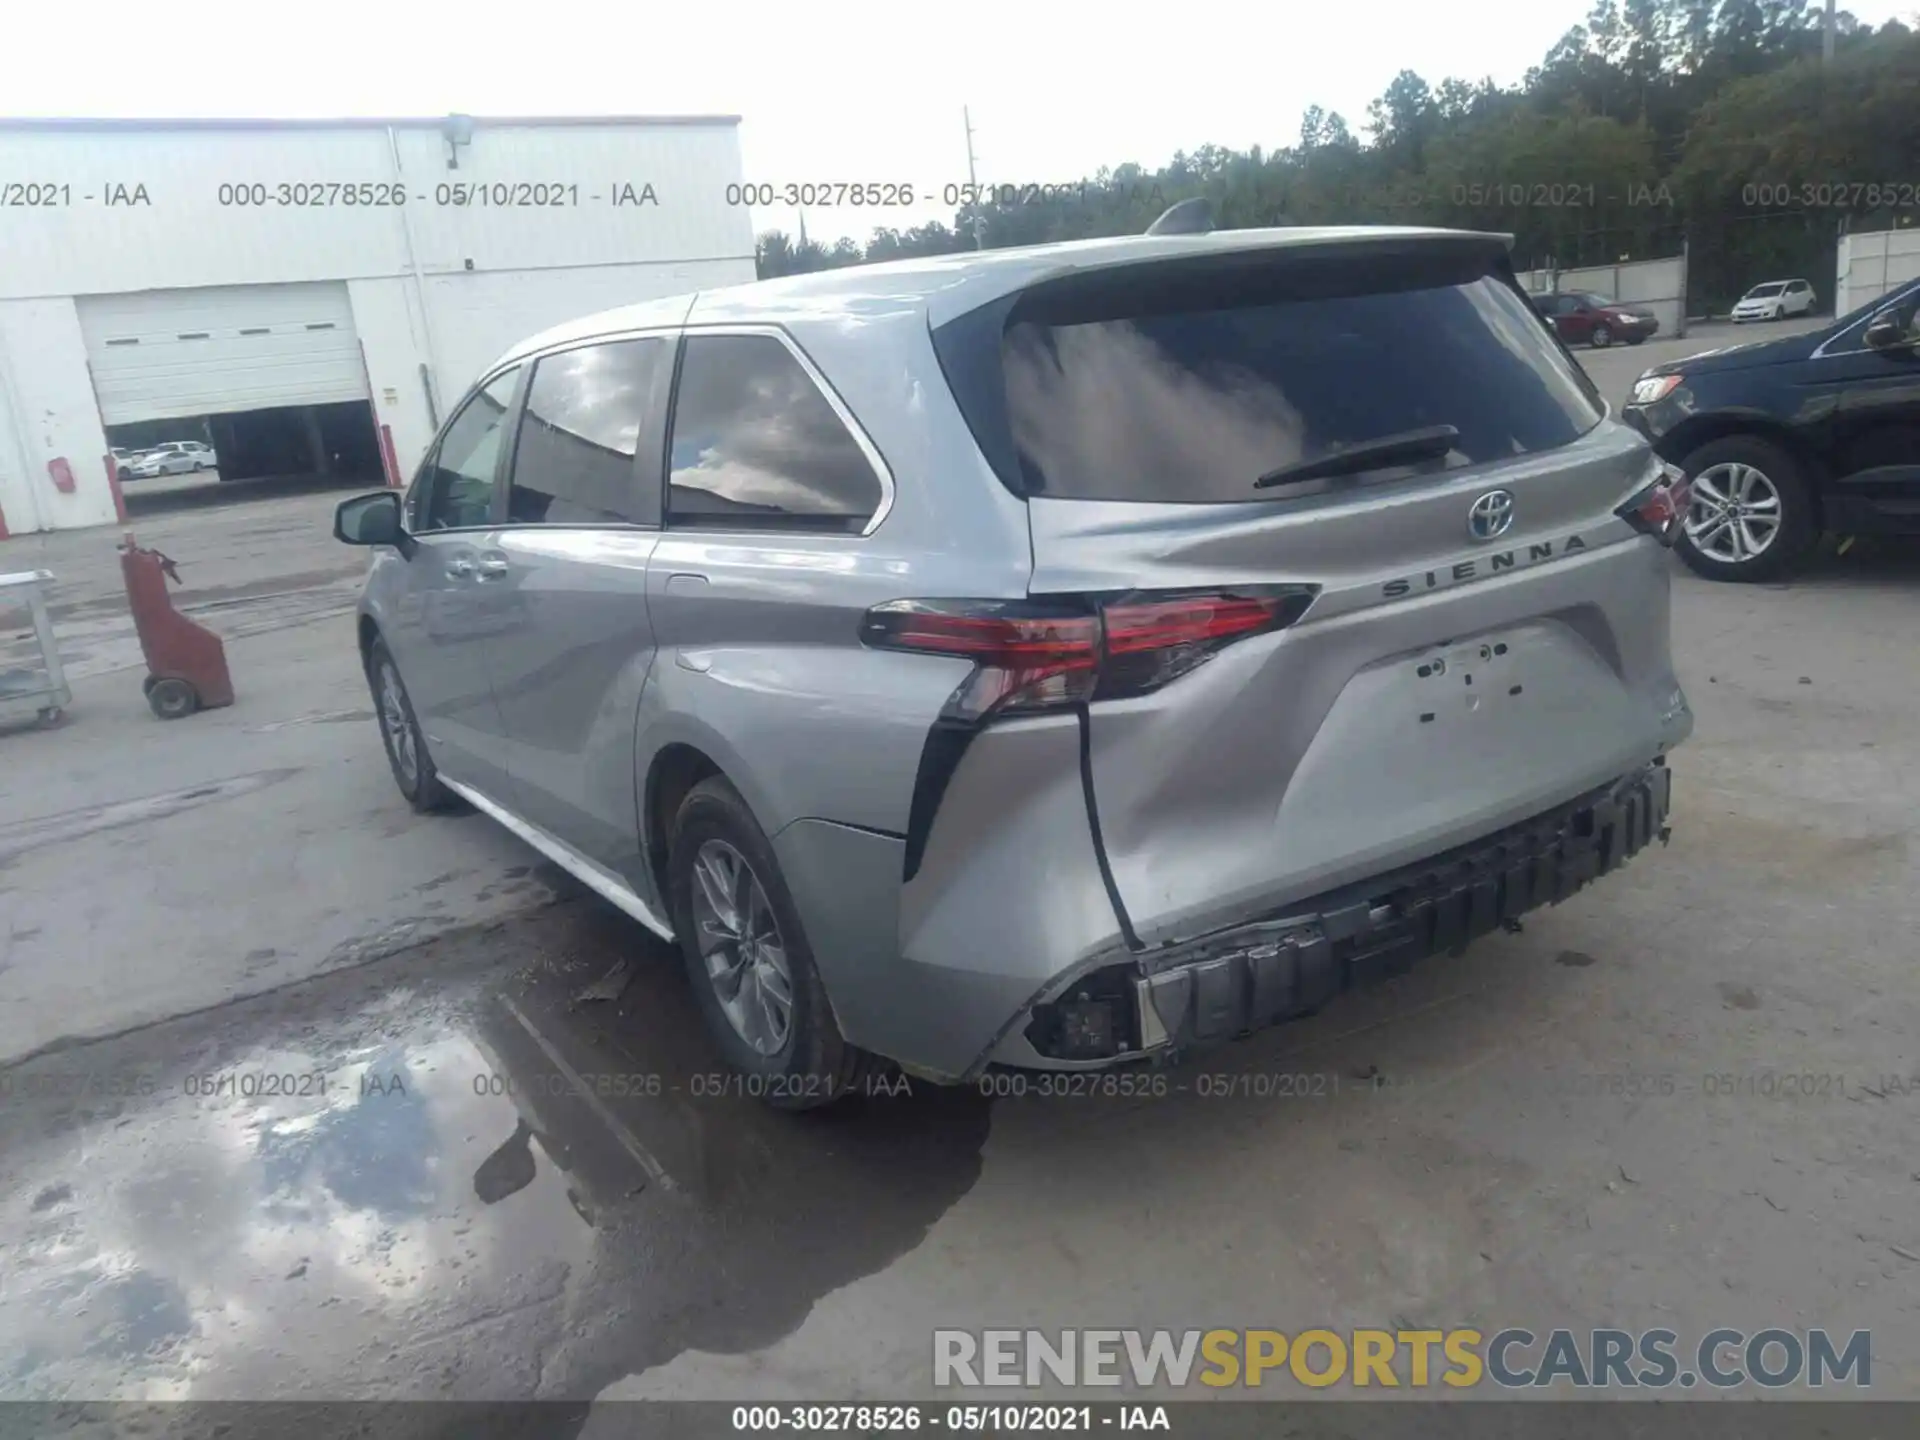 3 Photograph of a damaged car 5TDKRKEC1MS017079 TOYOTA SIENNA 2021